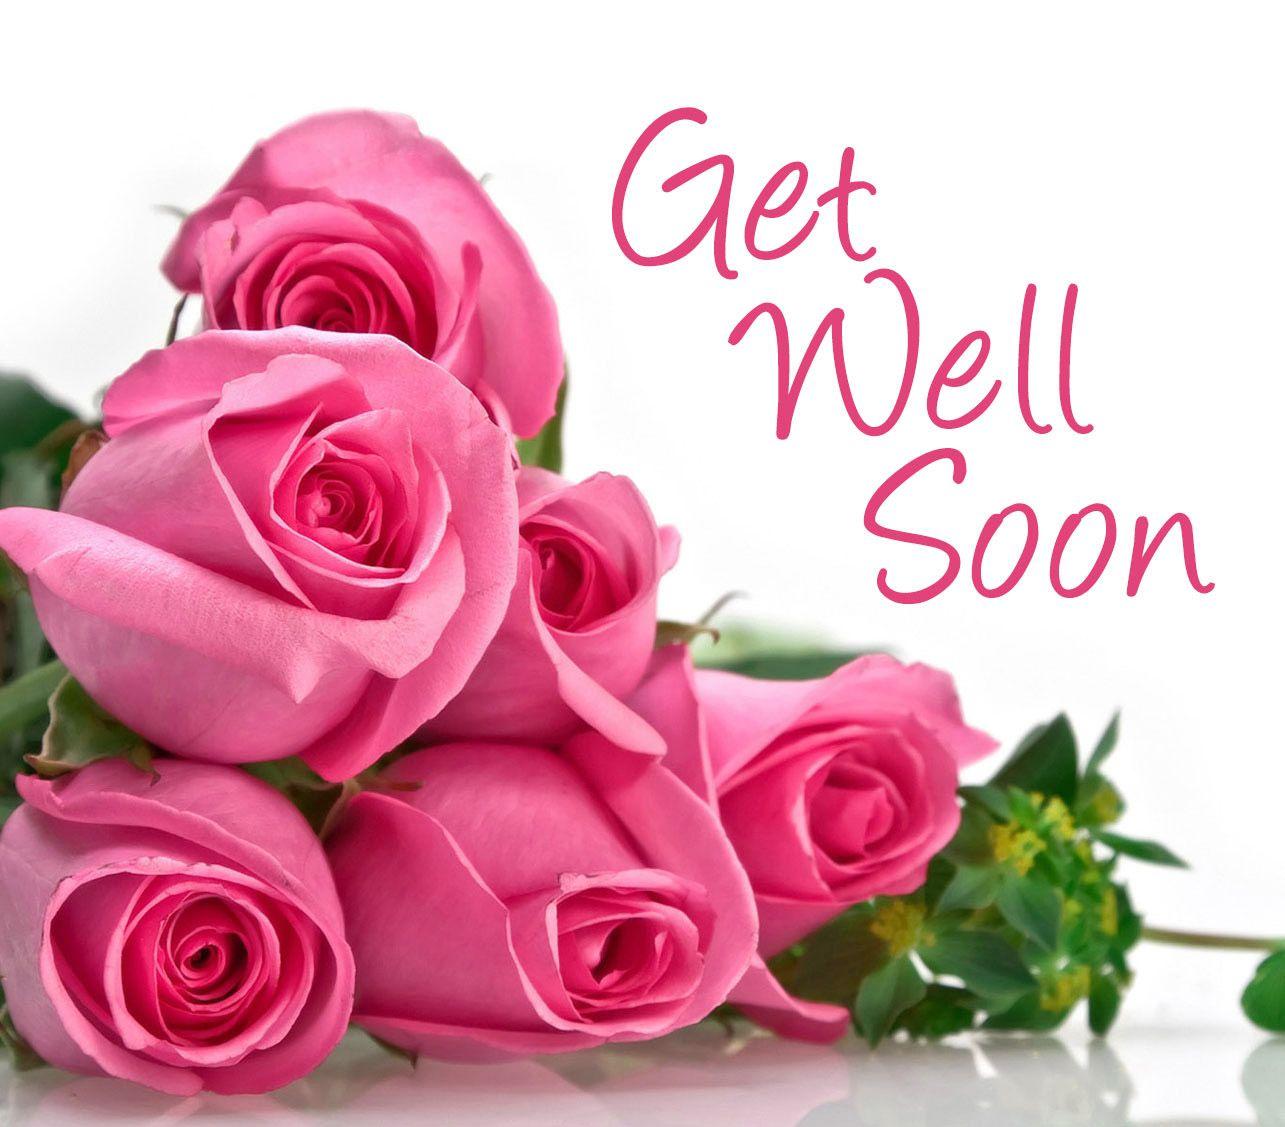 Get Well Soon Wallpapers - Top Free Get Well Soon Backgrounds ...